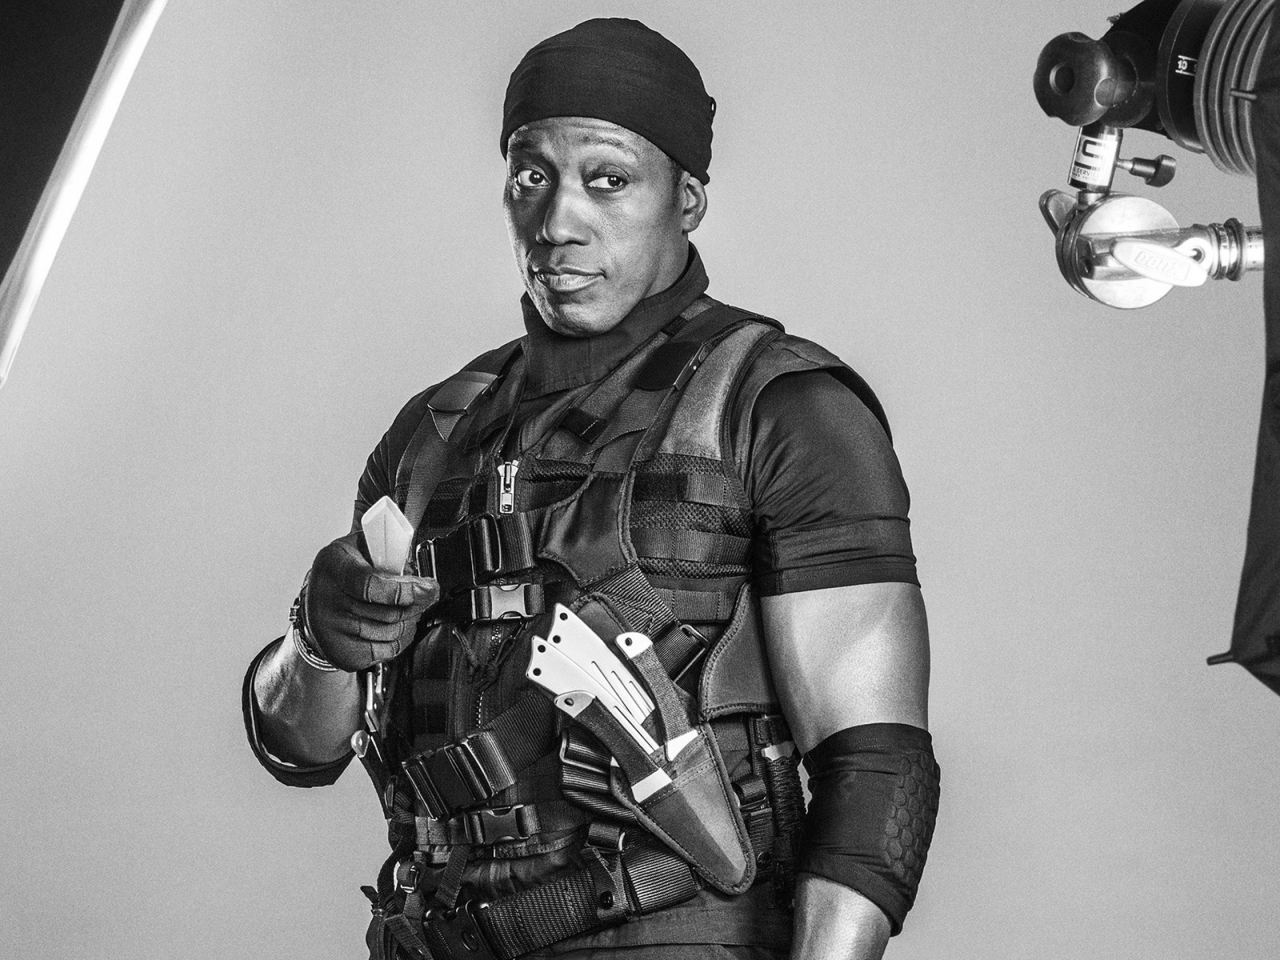 Wesley Snipes The Expendables 3 for 1280 x 960 resolution